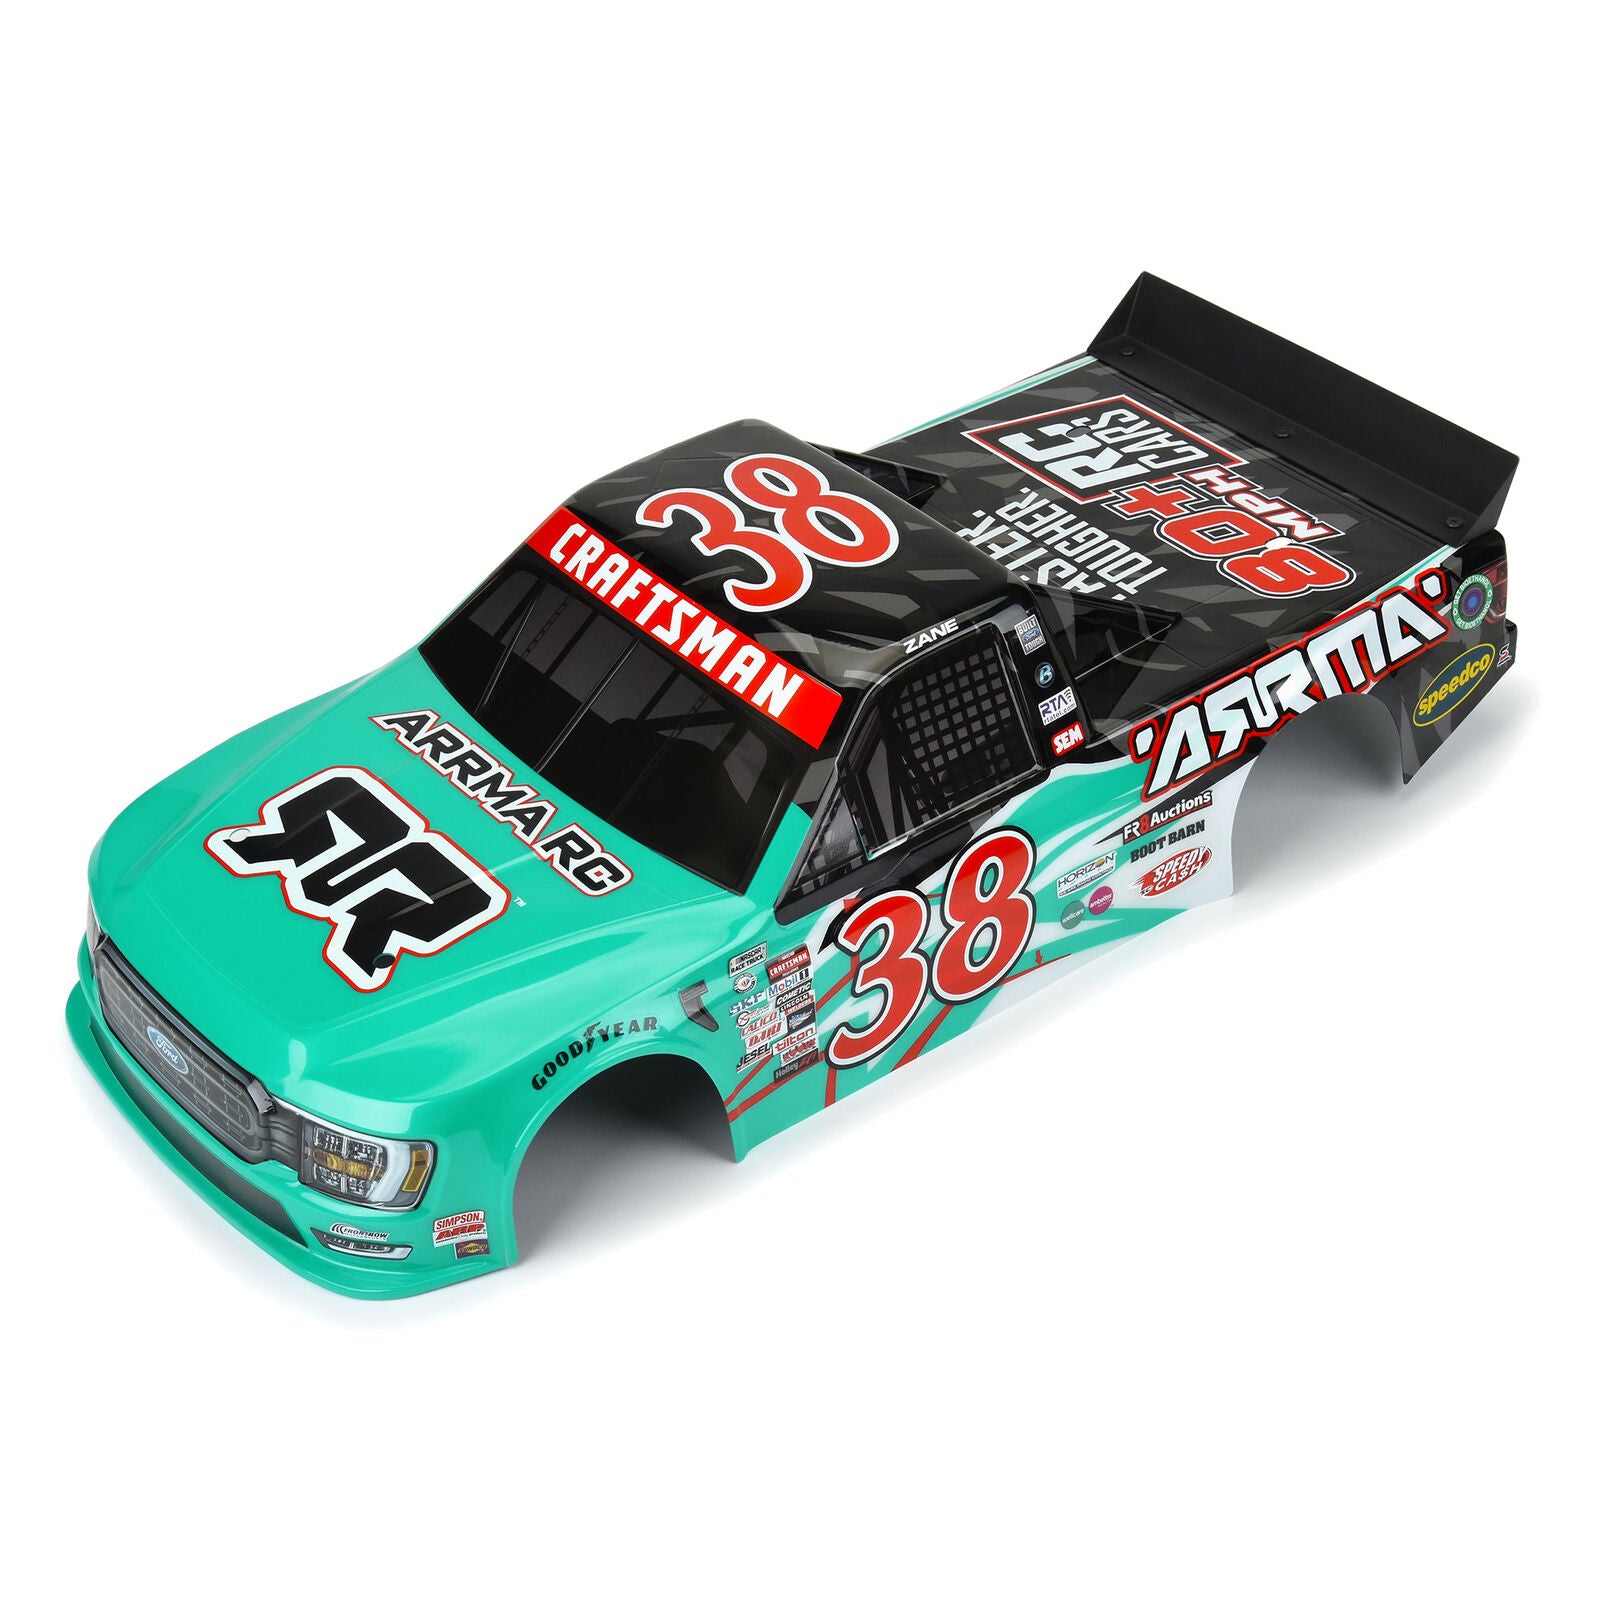 ARRMA ARA410018 1/7 2023 NASCAR Ford F-150 No.38 Truck LE Body (Teal): Infraction 6S